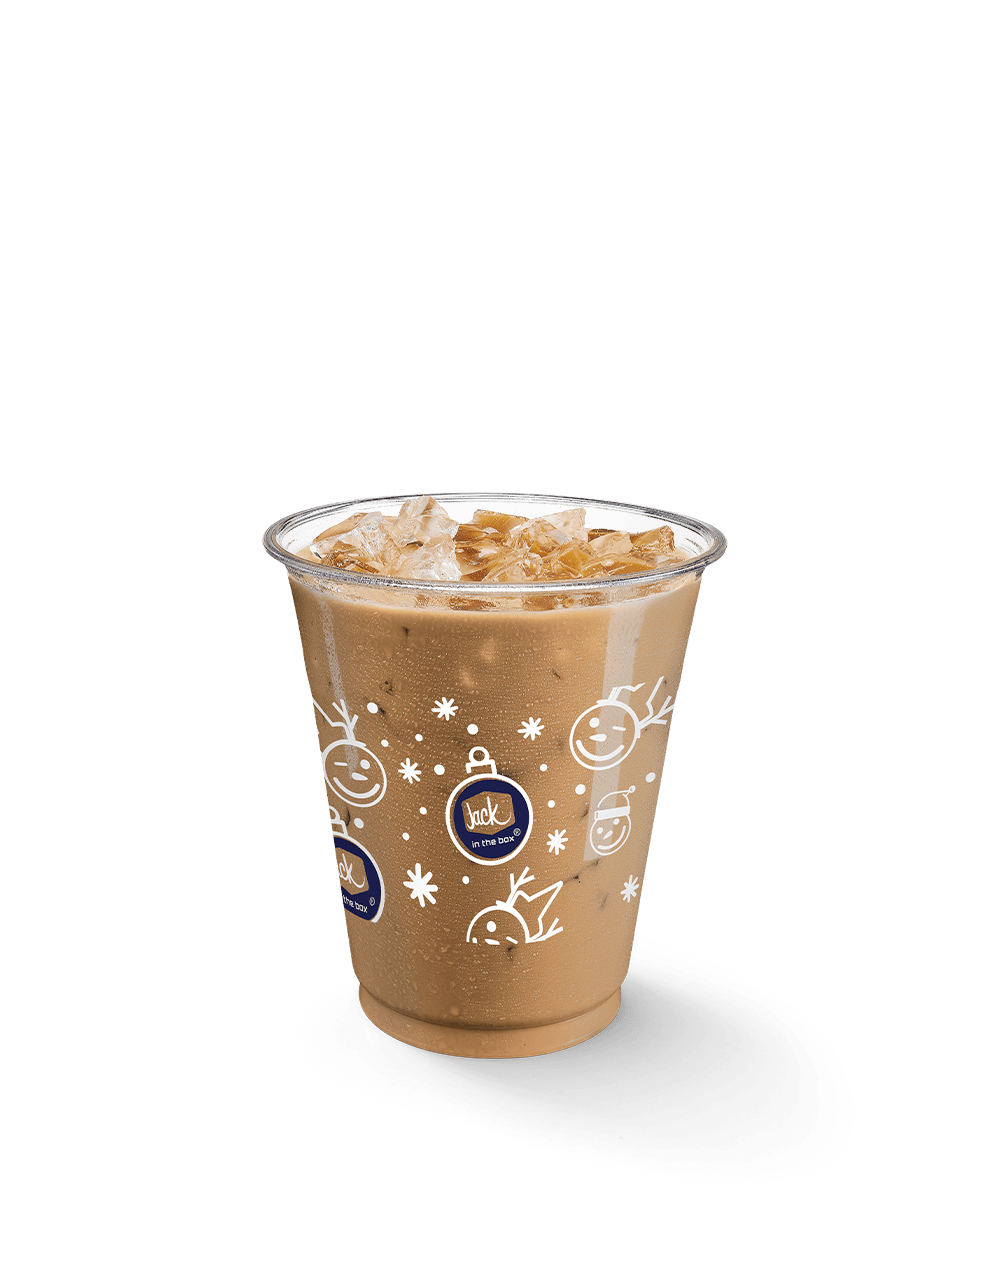 Jack in the Box Iced Salted Caramel Mocha Nutrition Facts